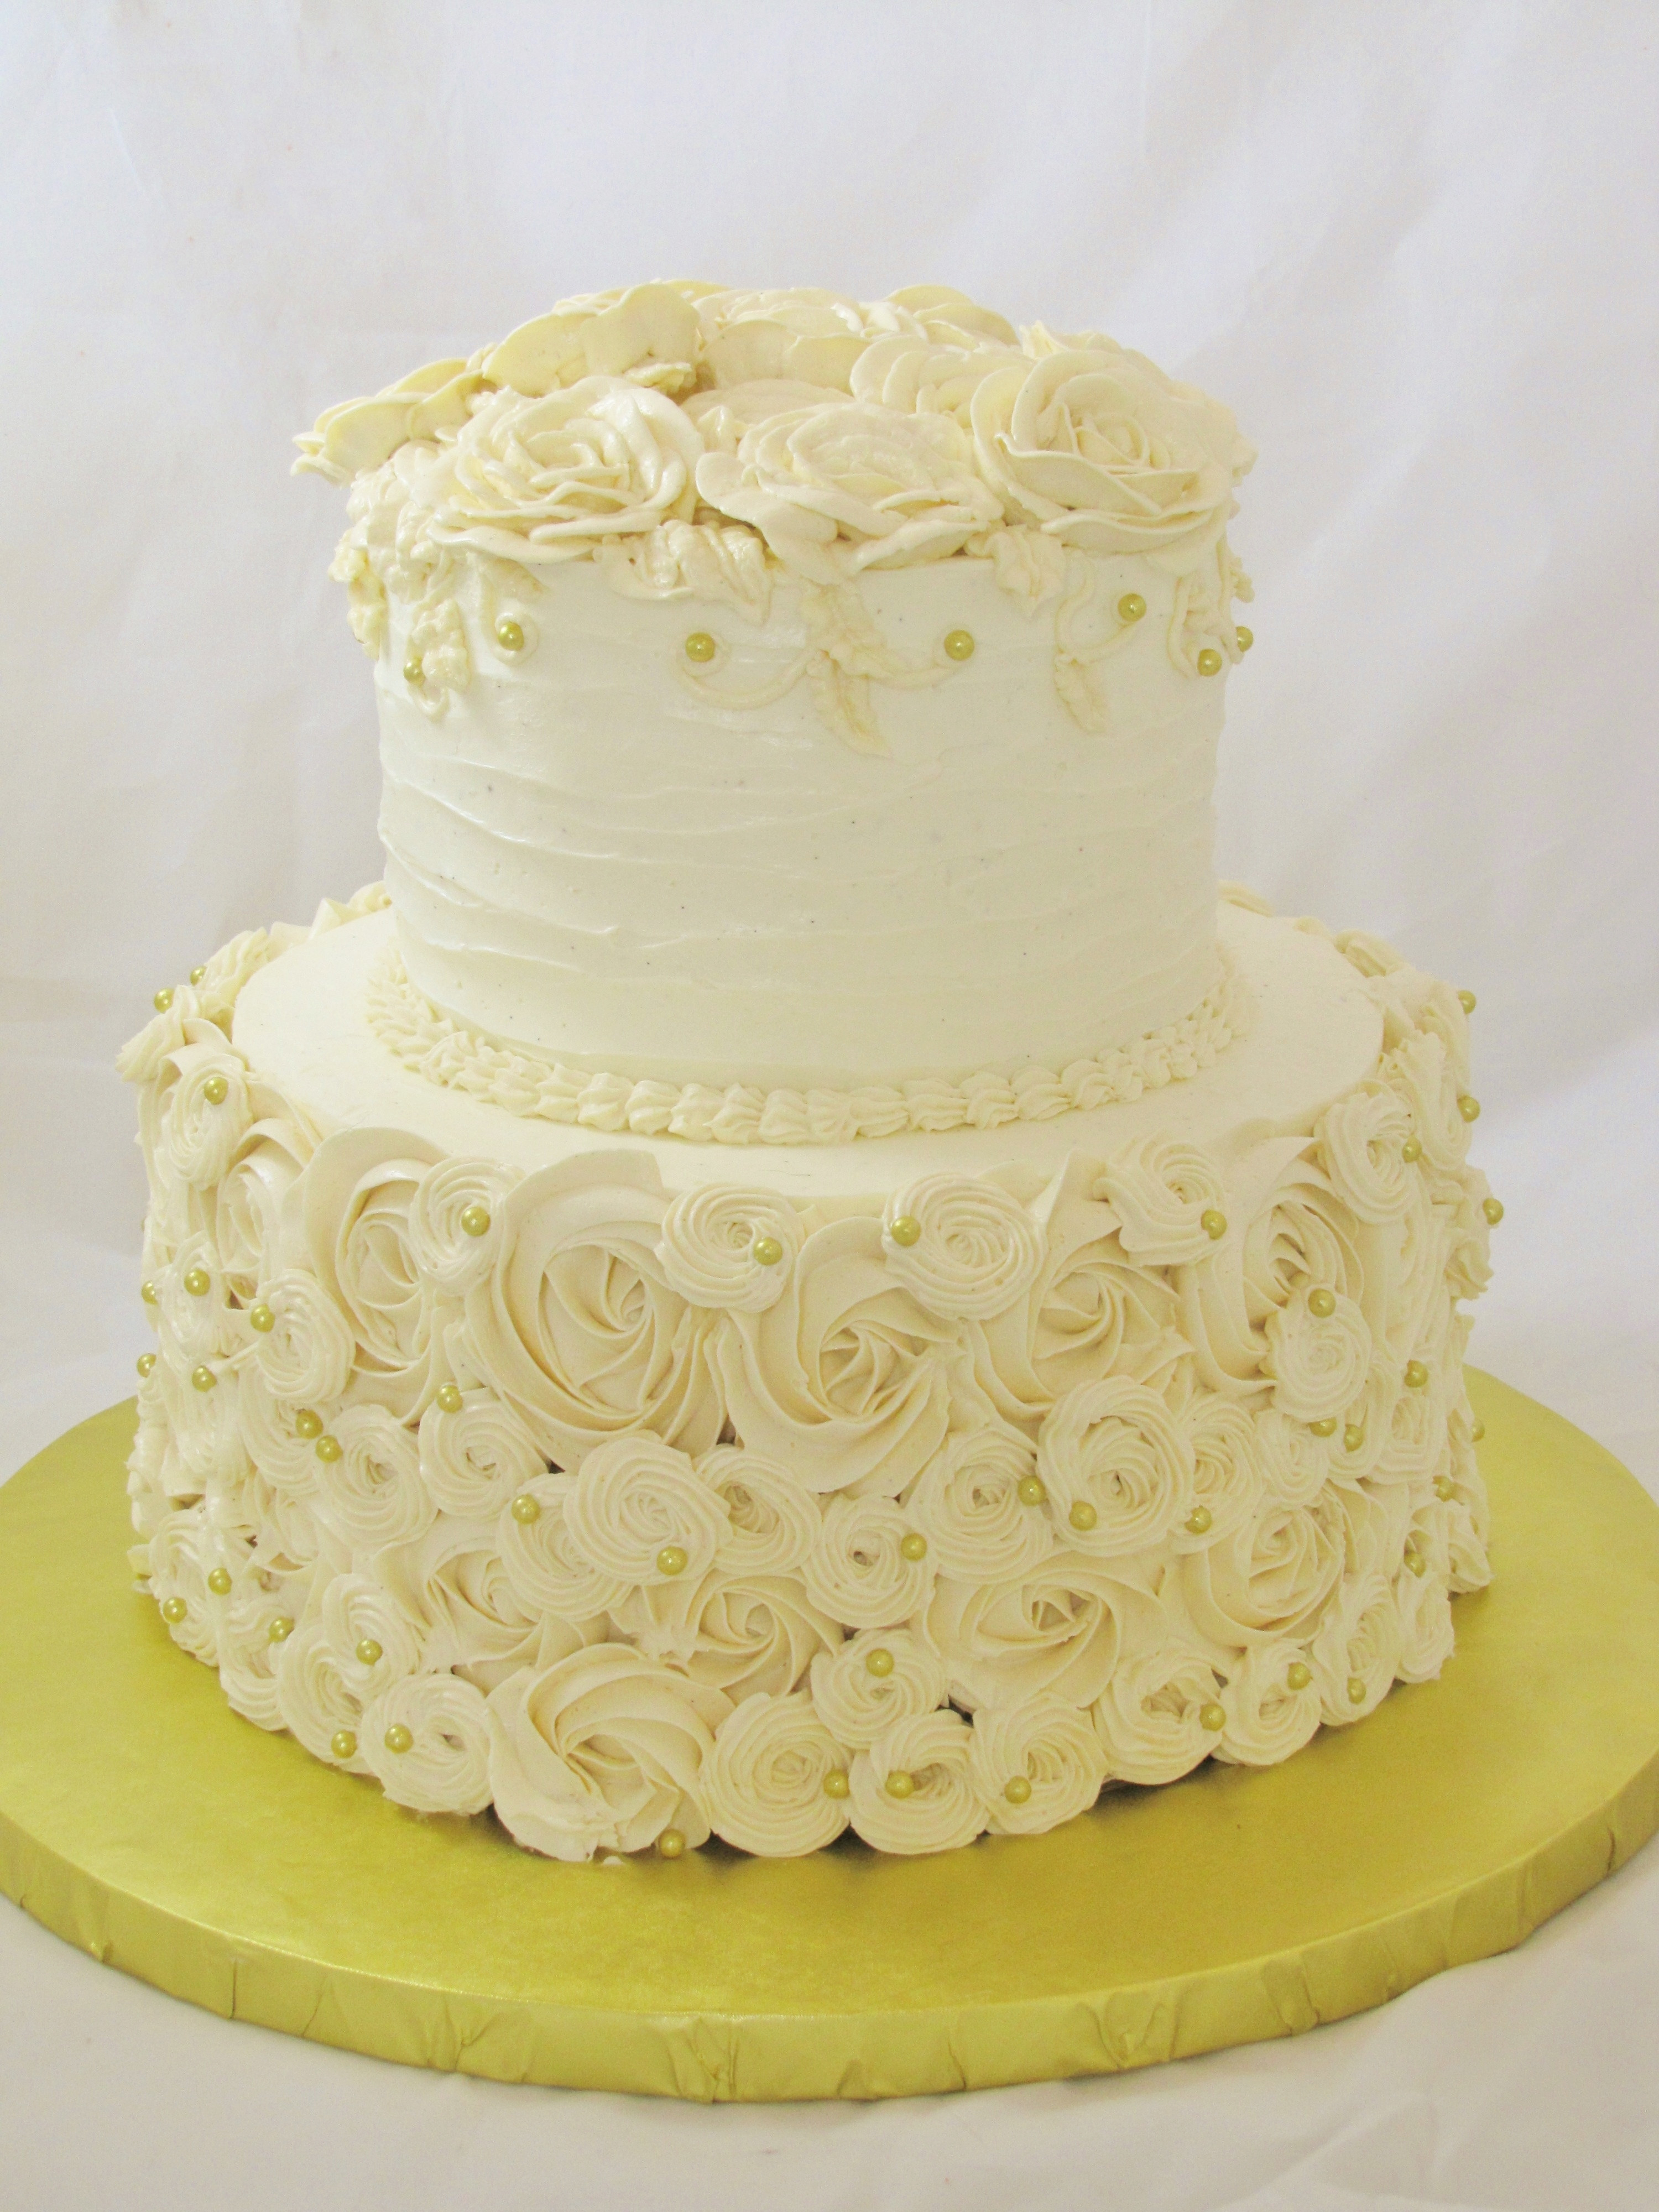 2 Tier Wedding Cakes Buttercream
 Round Piped Buttercream Wedding Cake CakeCentral